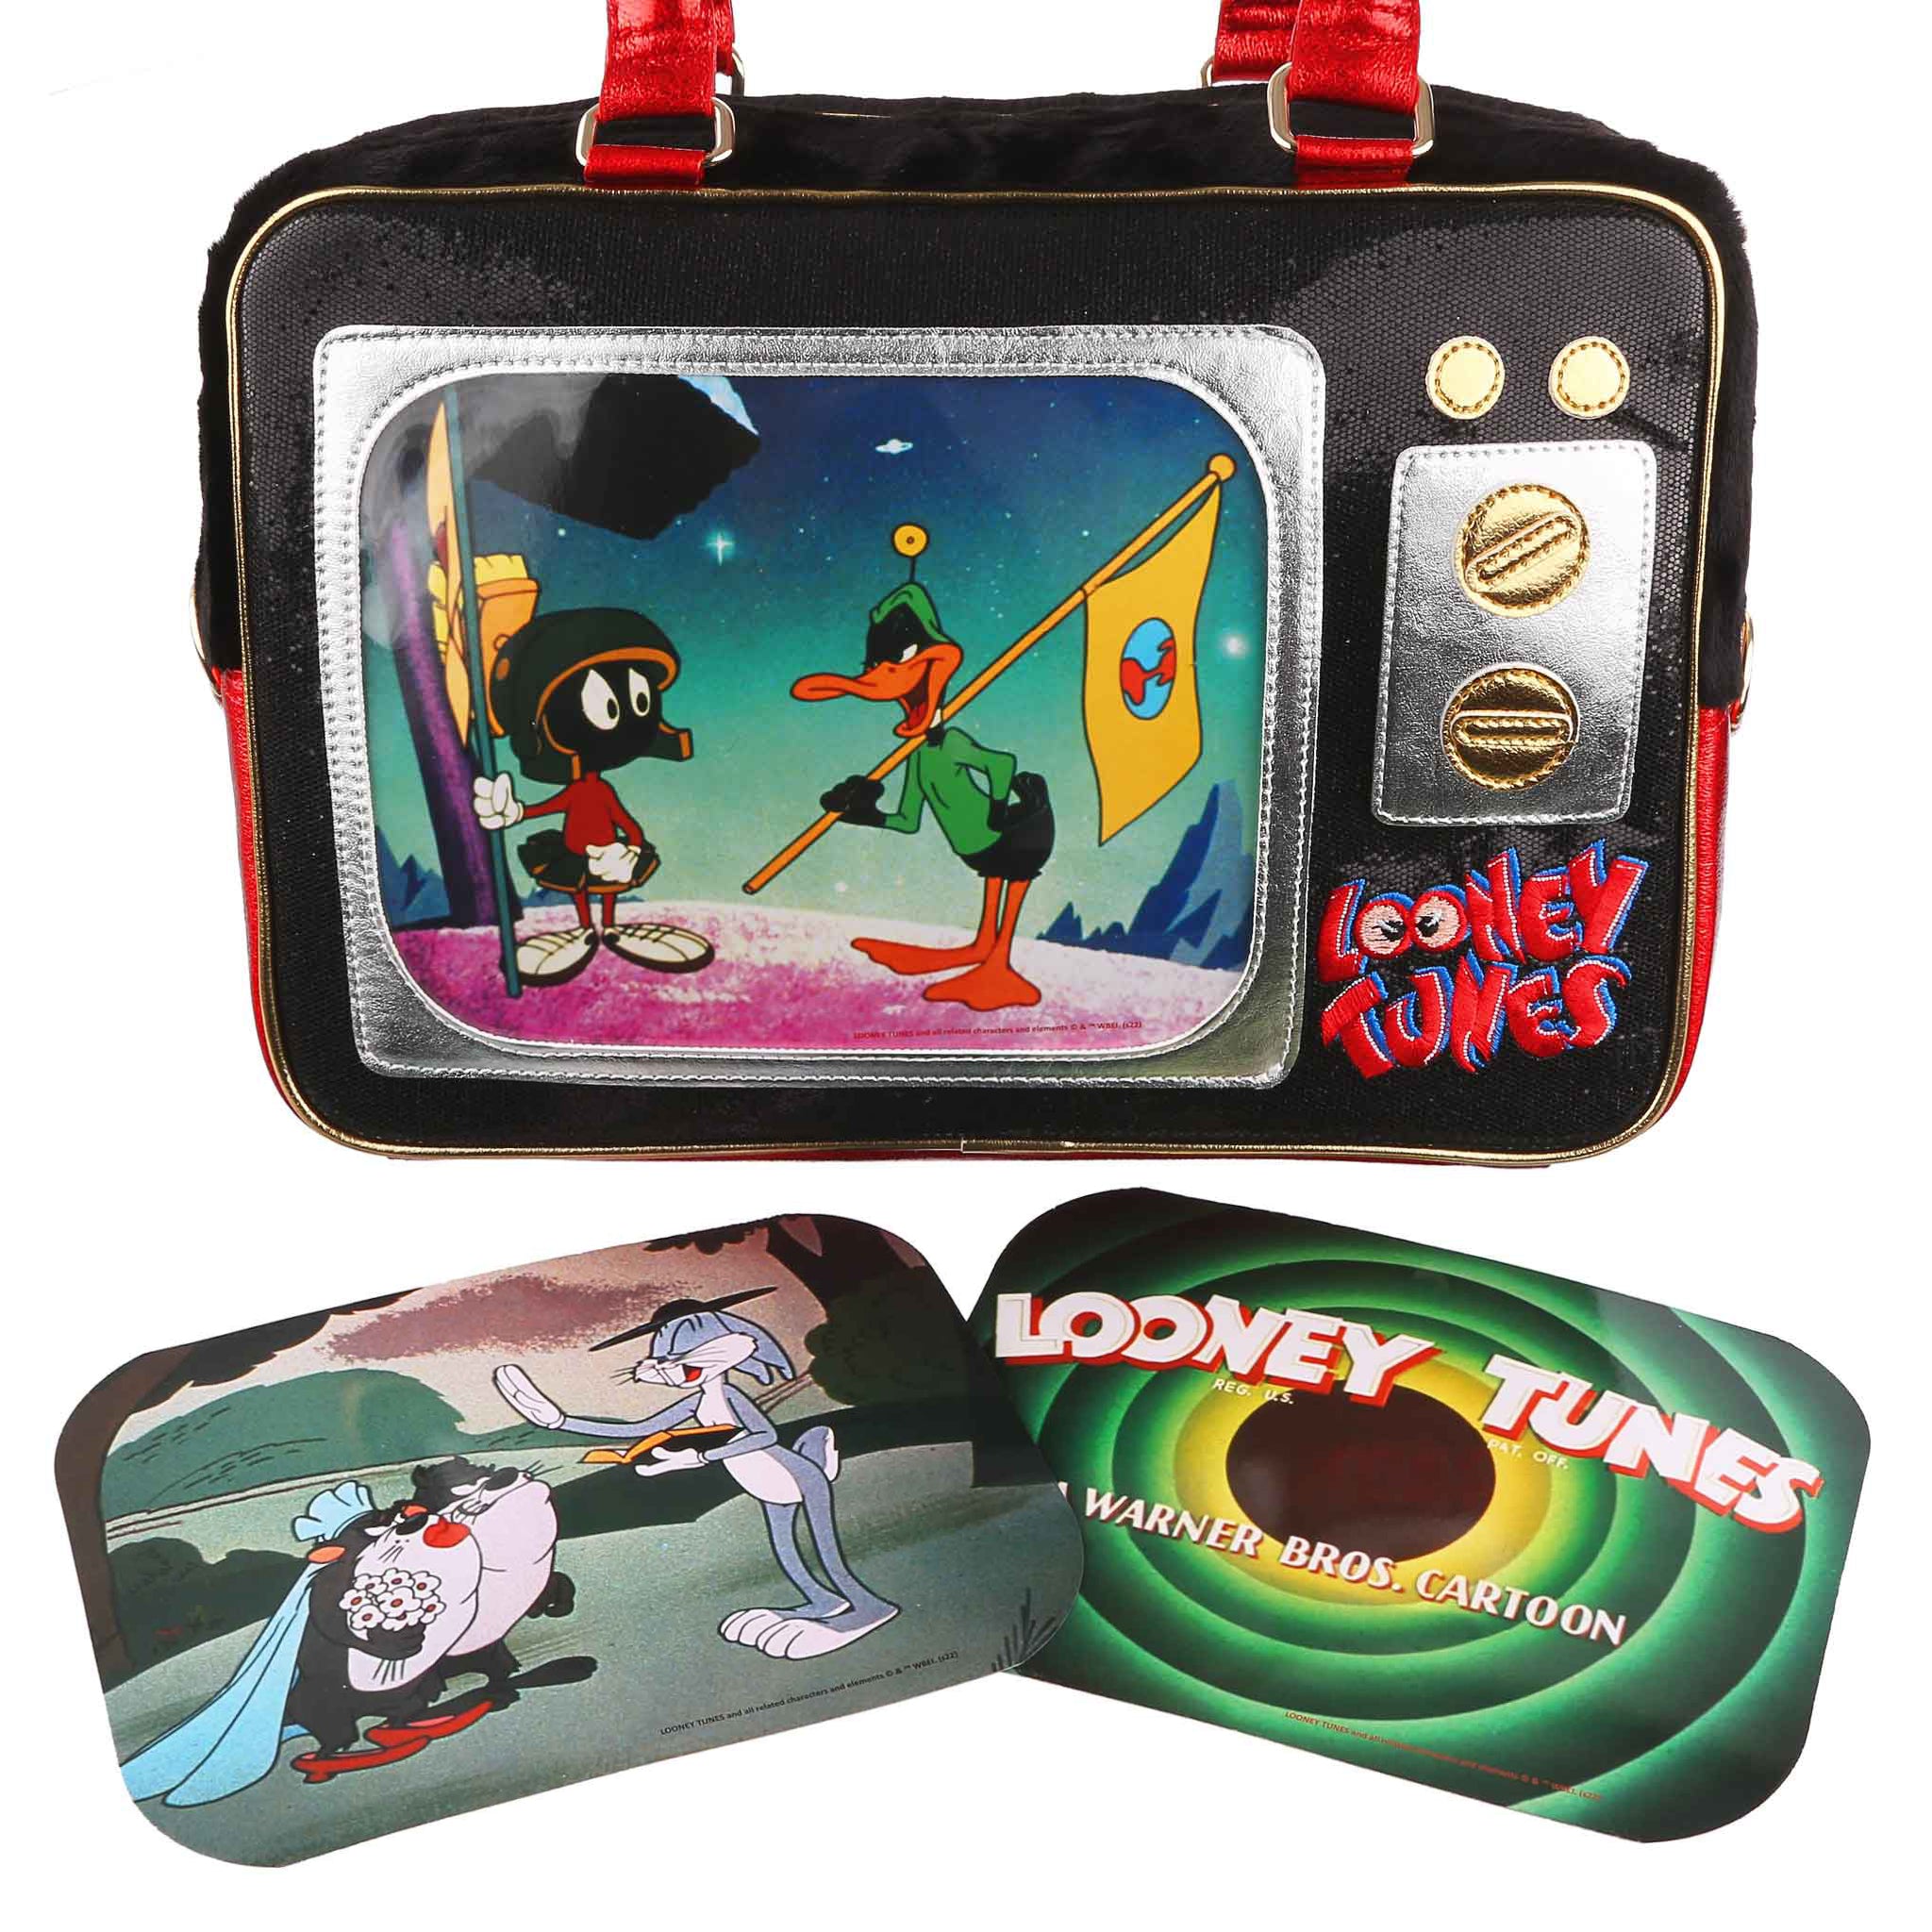 Rectangle zip bag has gold and silver applique to look like a TV, with changesble 'screens' that slide in and out at the front. With red embroidered Looney Tunes logo in the bottom right corner and matching red handles.